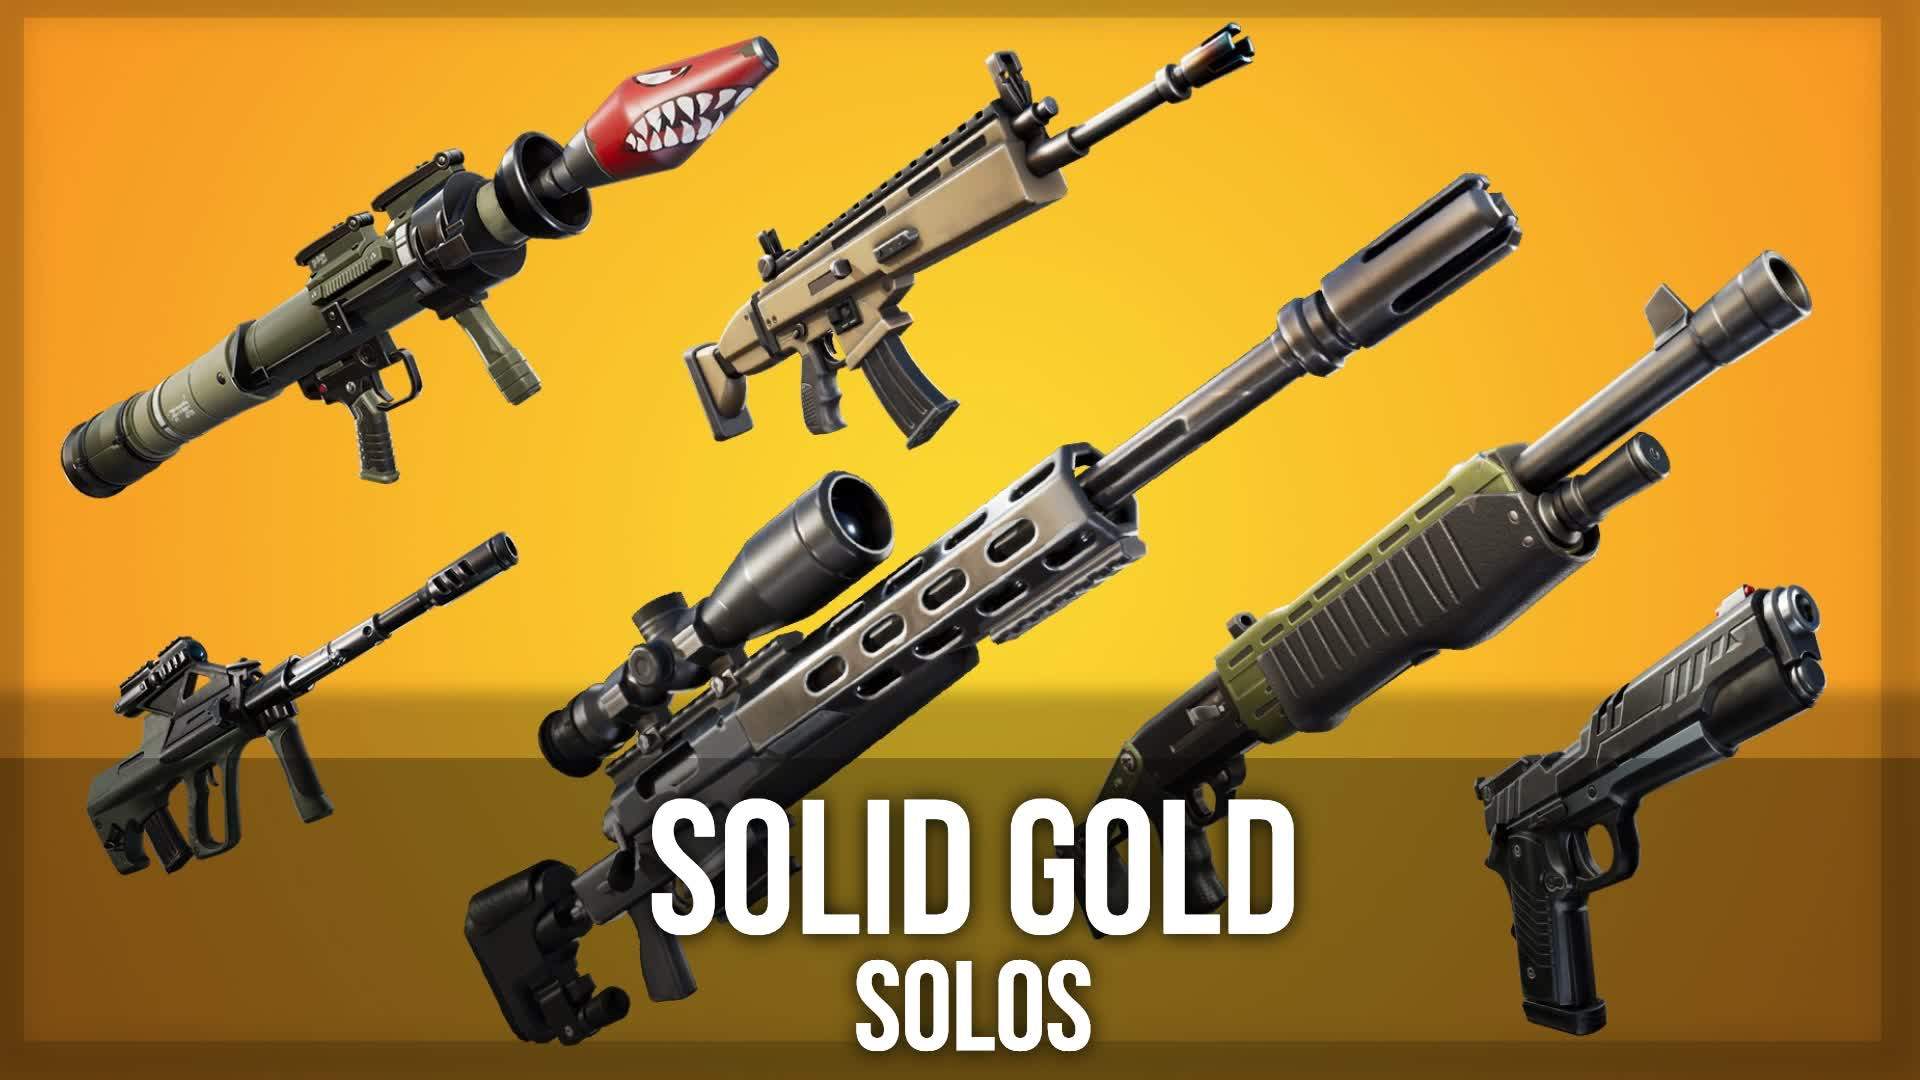 Solid Gold Solos